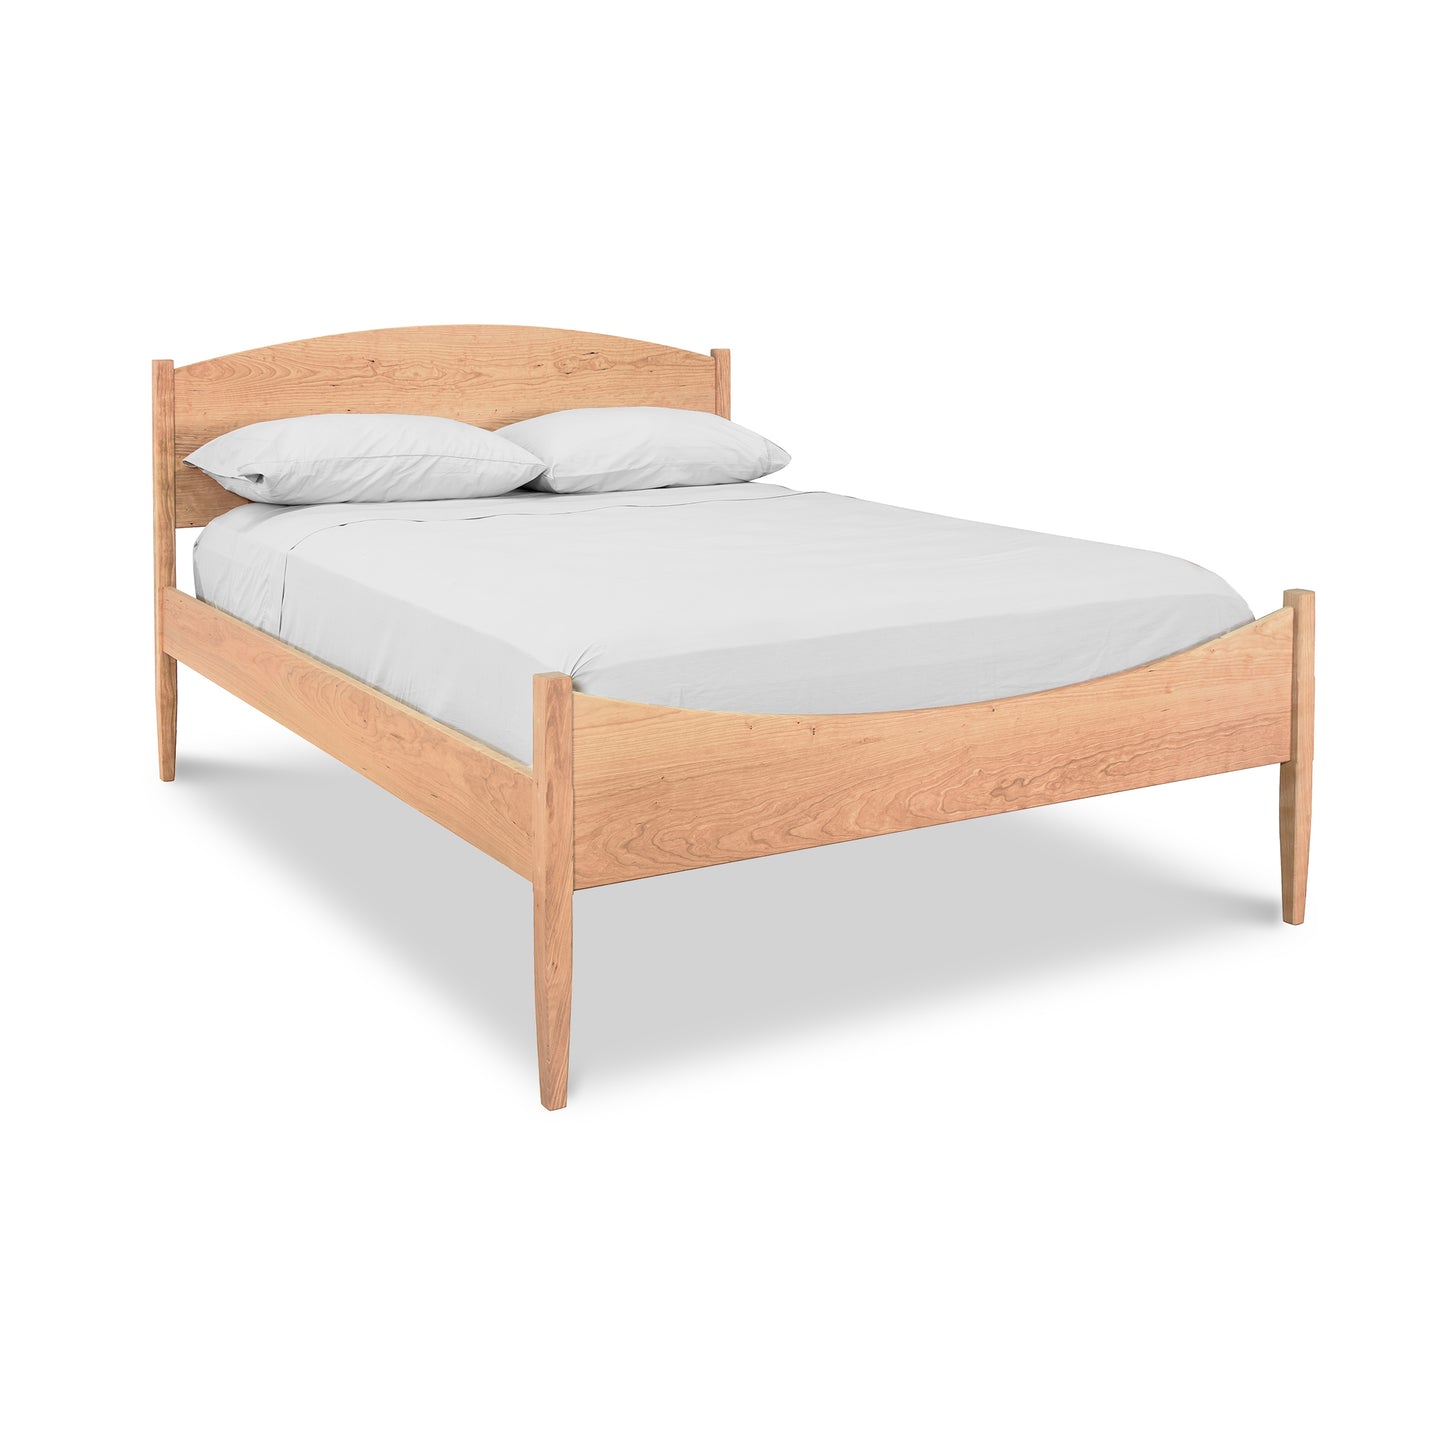 A simple eco-friendly Vermont Shaker Moon bed frame with a headboard, featuring neatly arranged white bedding and two pillows, isolated on a white background.